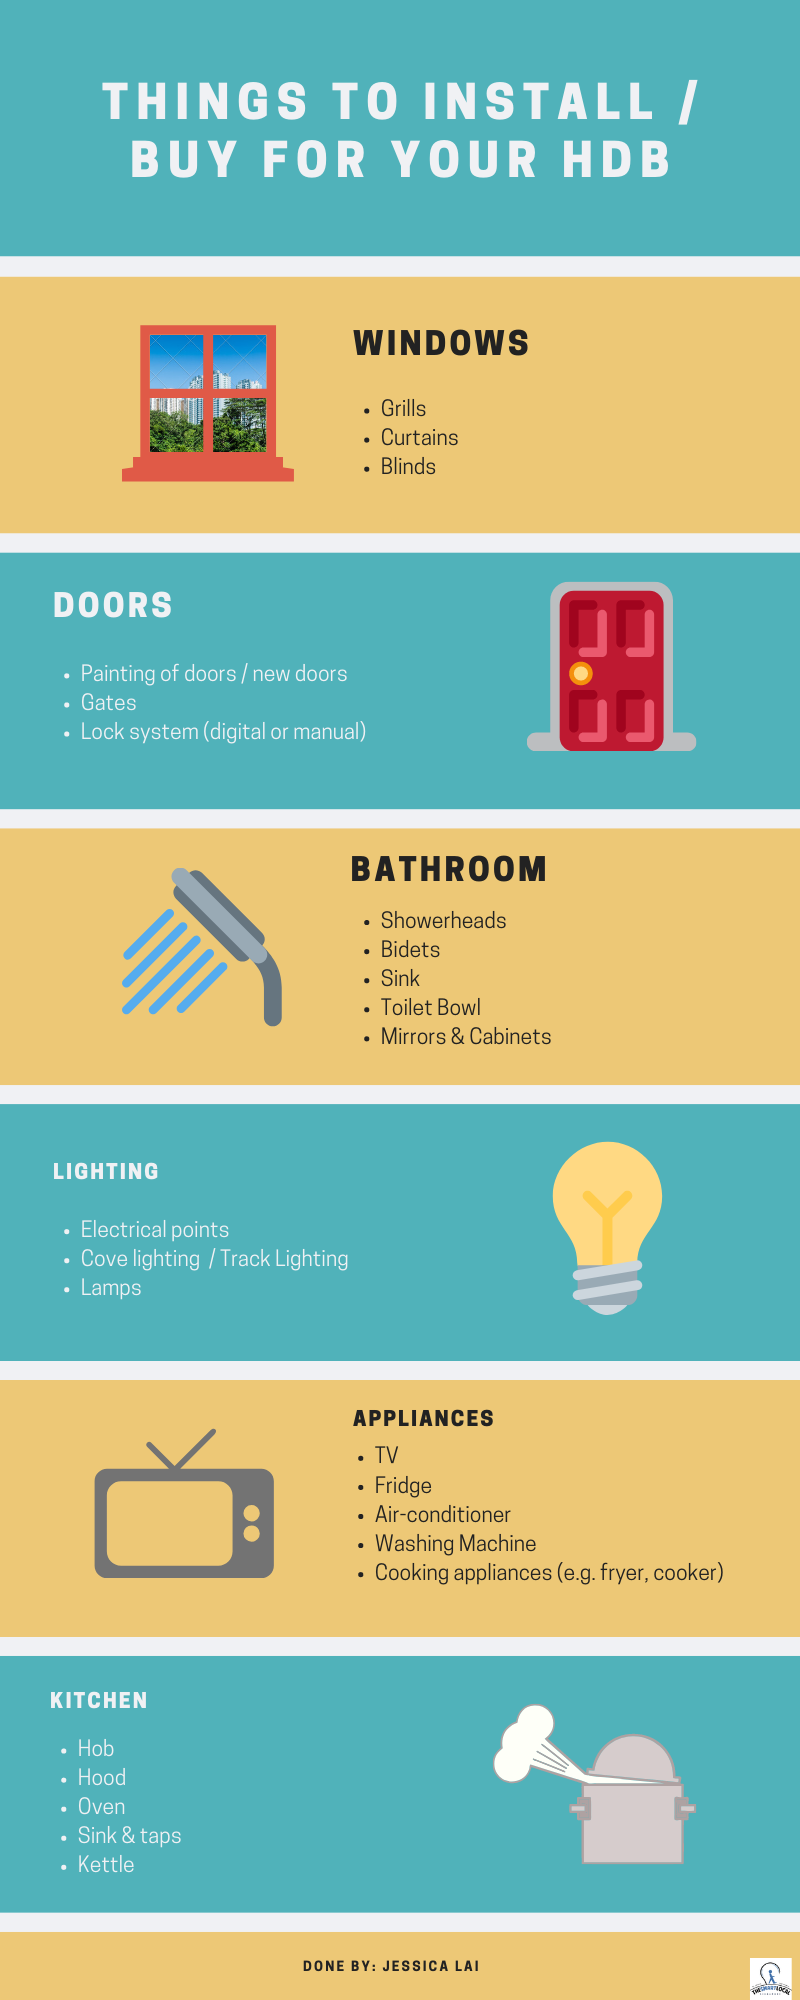 hdb home appliances fixtures what to buy checklist